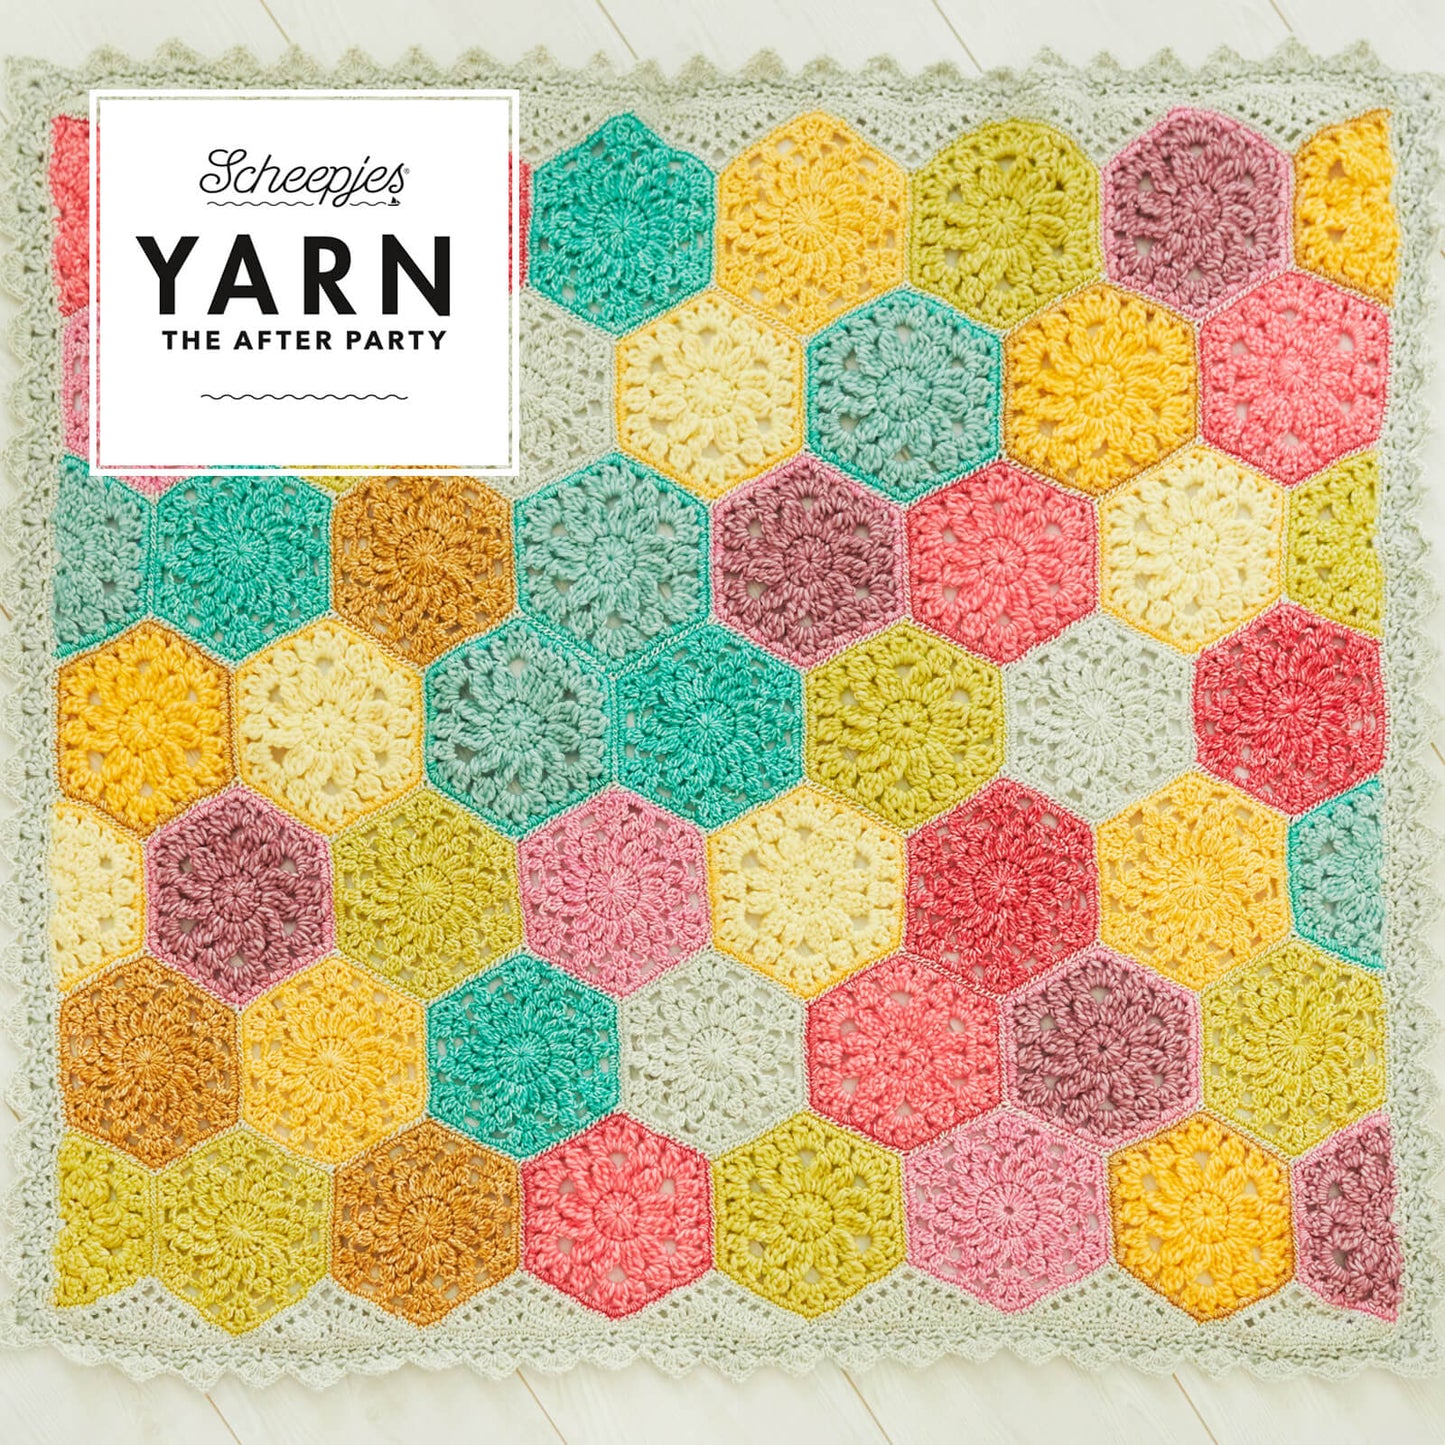 Scheepjes Yarn The After Party no. 42 - Confetti Blanket (booklet) - (Crochet)